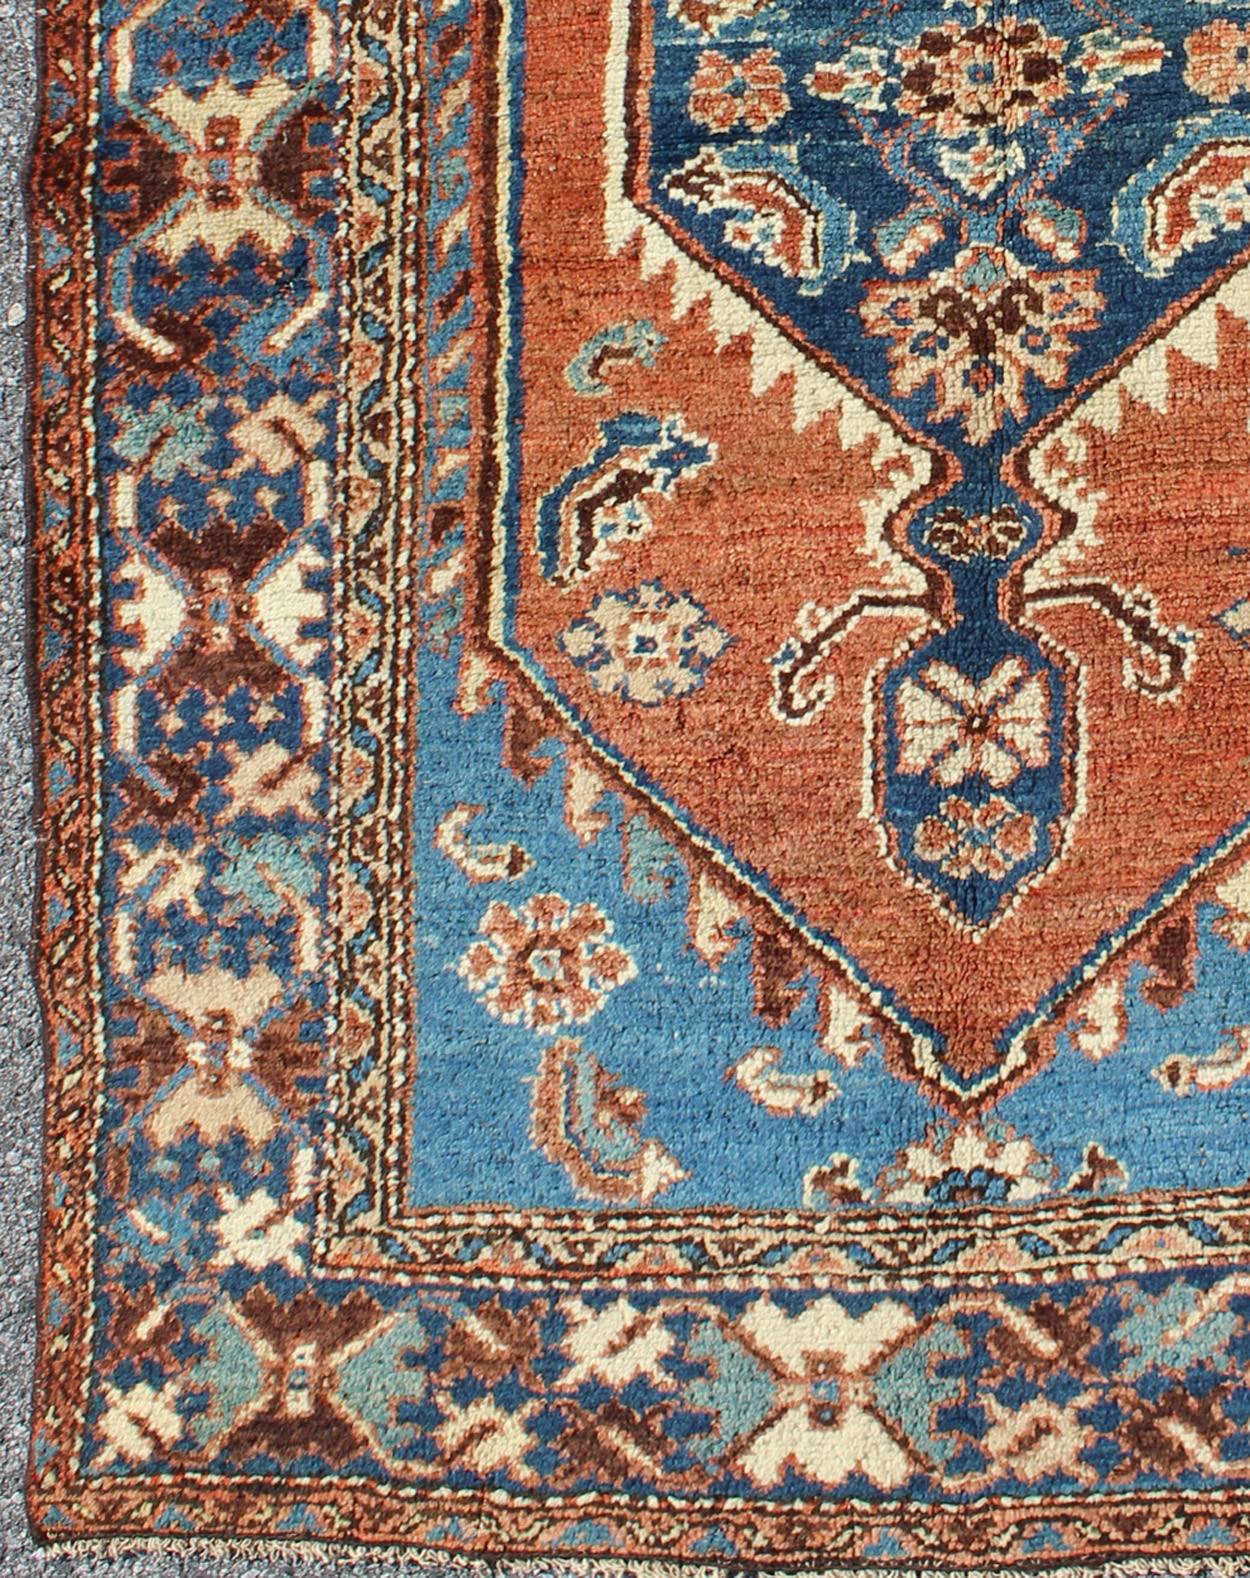 Antique Persian Karadjeh rug with tribal medallion in rust red and bright blue, rugs 12-0104, country of origin / type: Iran / Karadjeh, circa 1910.

This early 20th century, handwoven antique Persian Karadjeh rug features a rust red-colored field